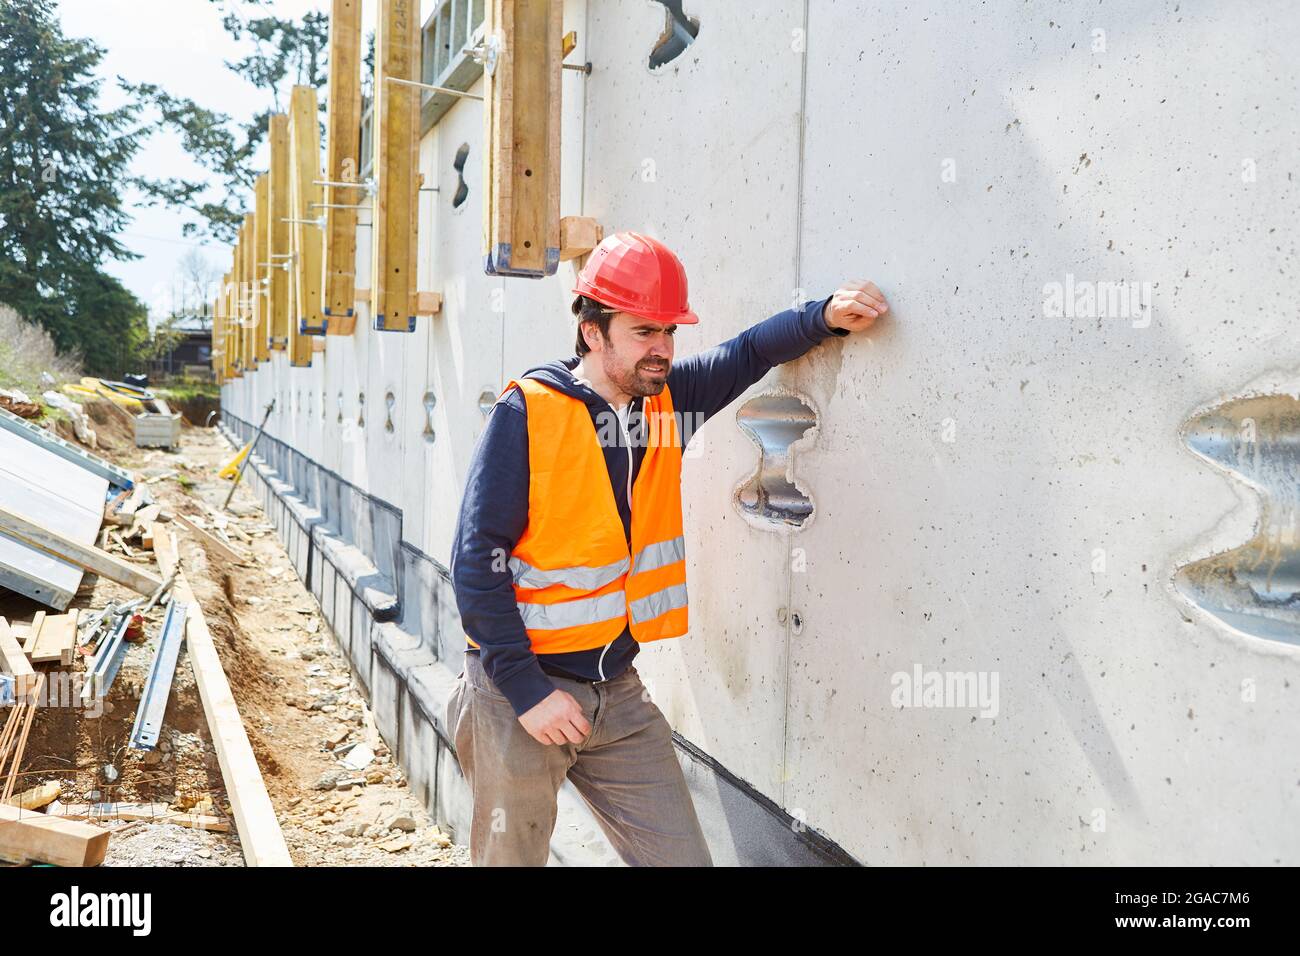 Construction worker as a foreman with a red hard hat is standing on the facade of a building site under construction Stock Photo